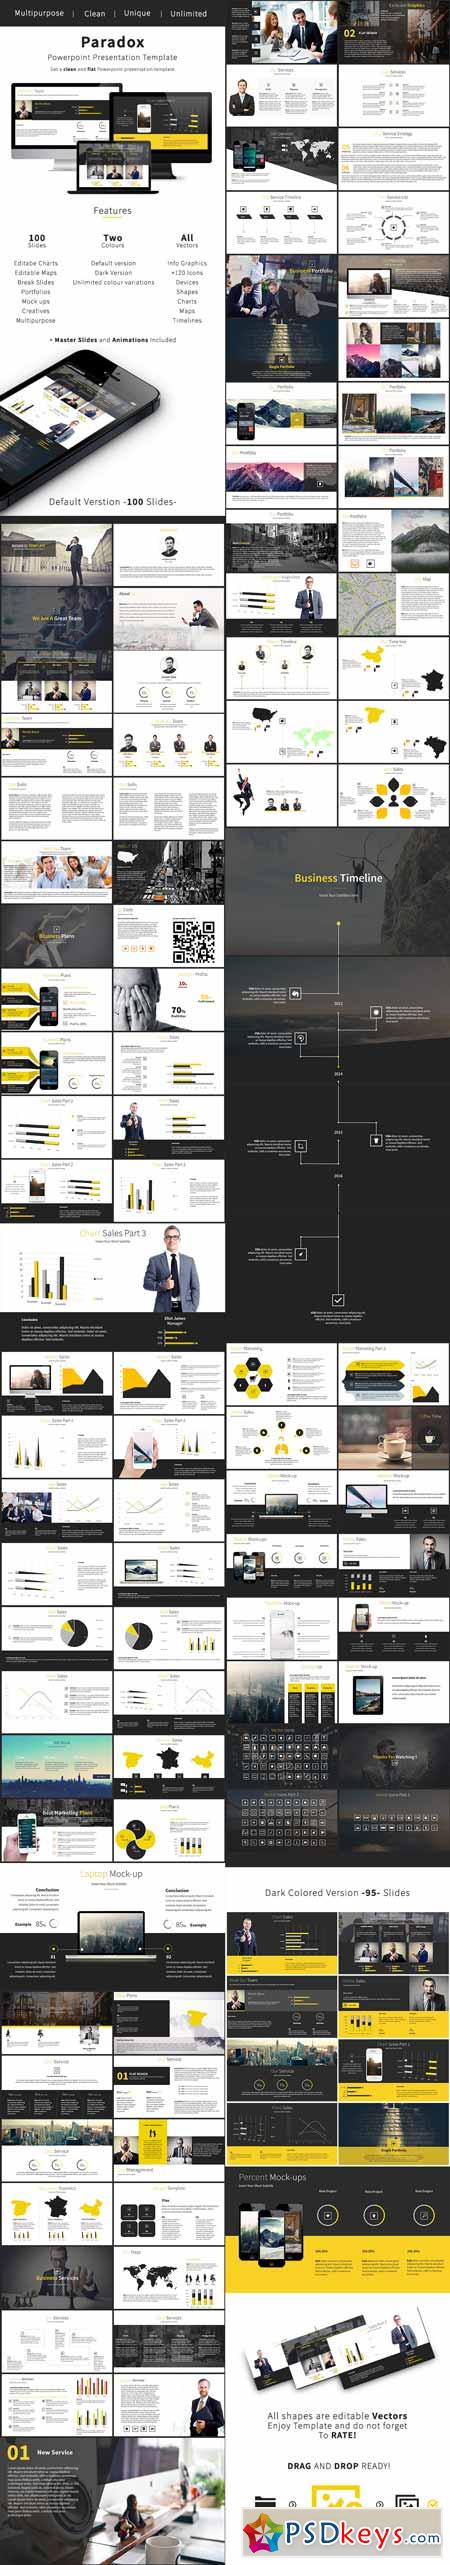 Paradox - Business Powerpoint Template 10667283